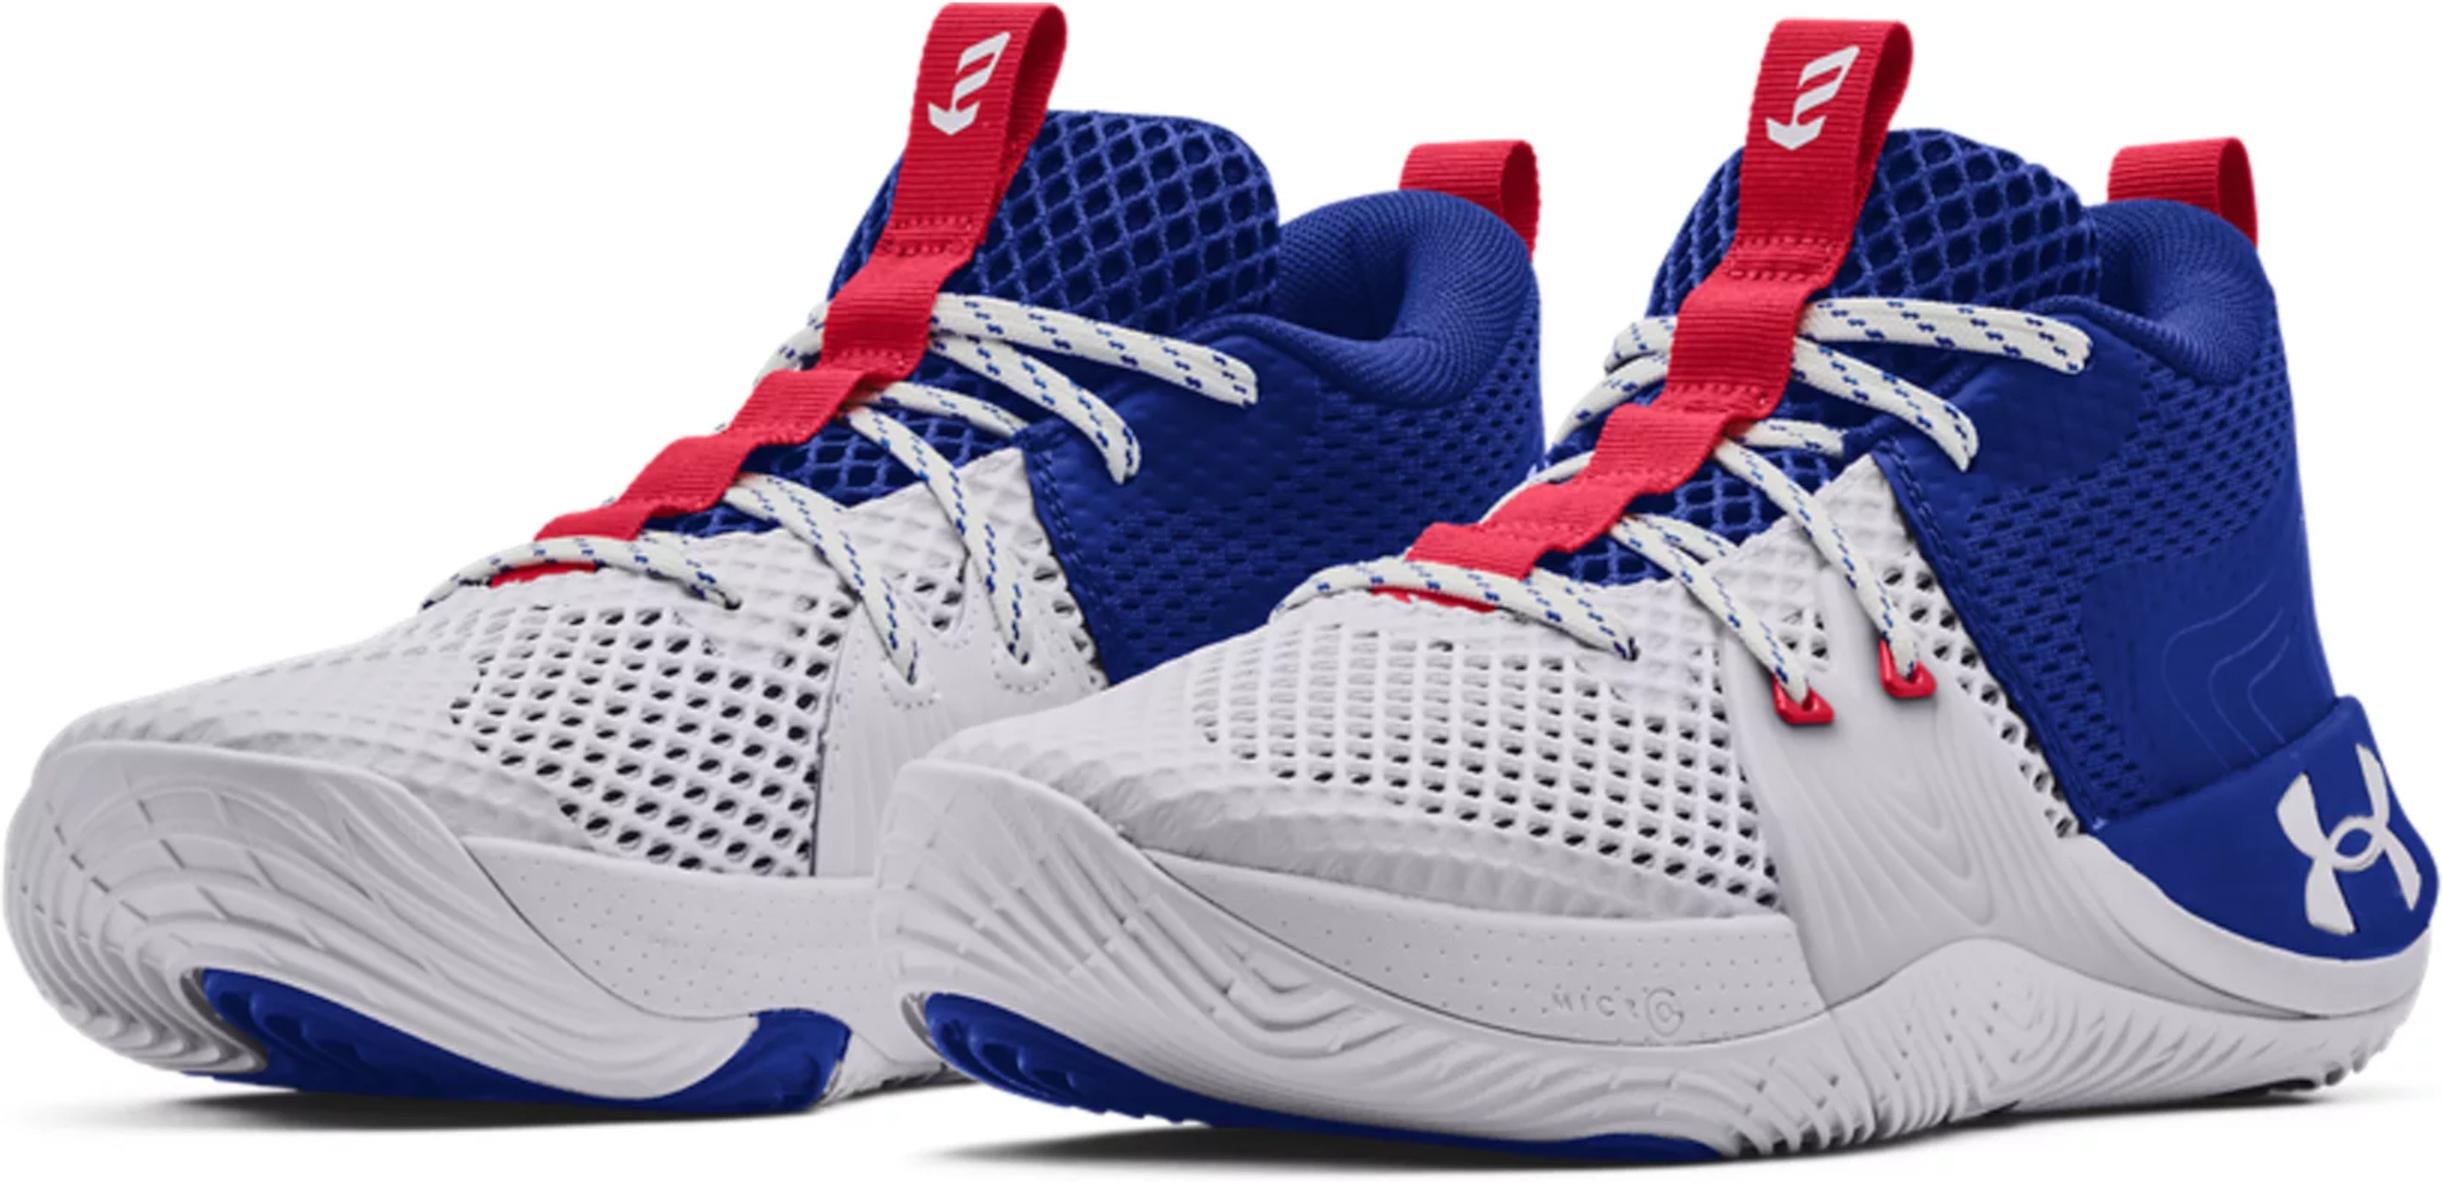 Under Armour EMBIID 1 GM PT